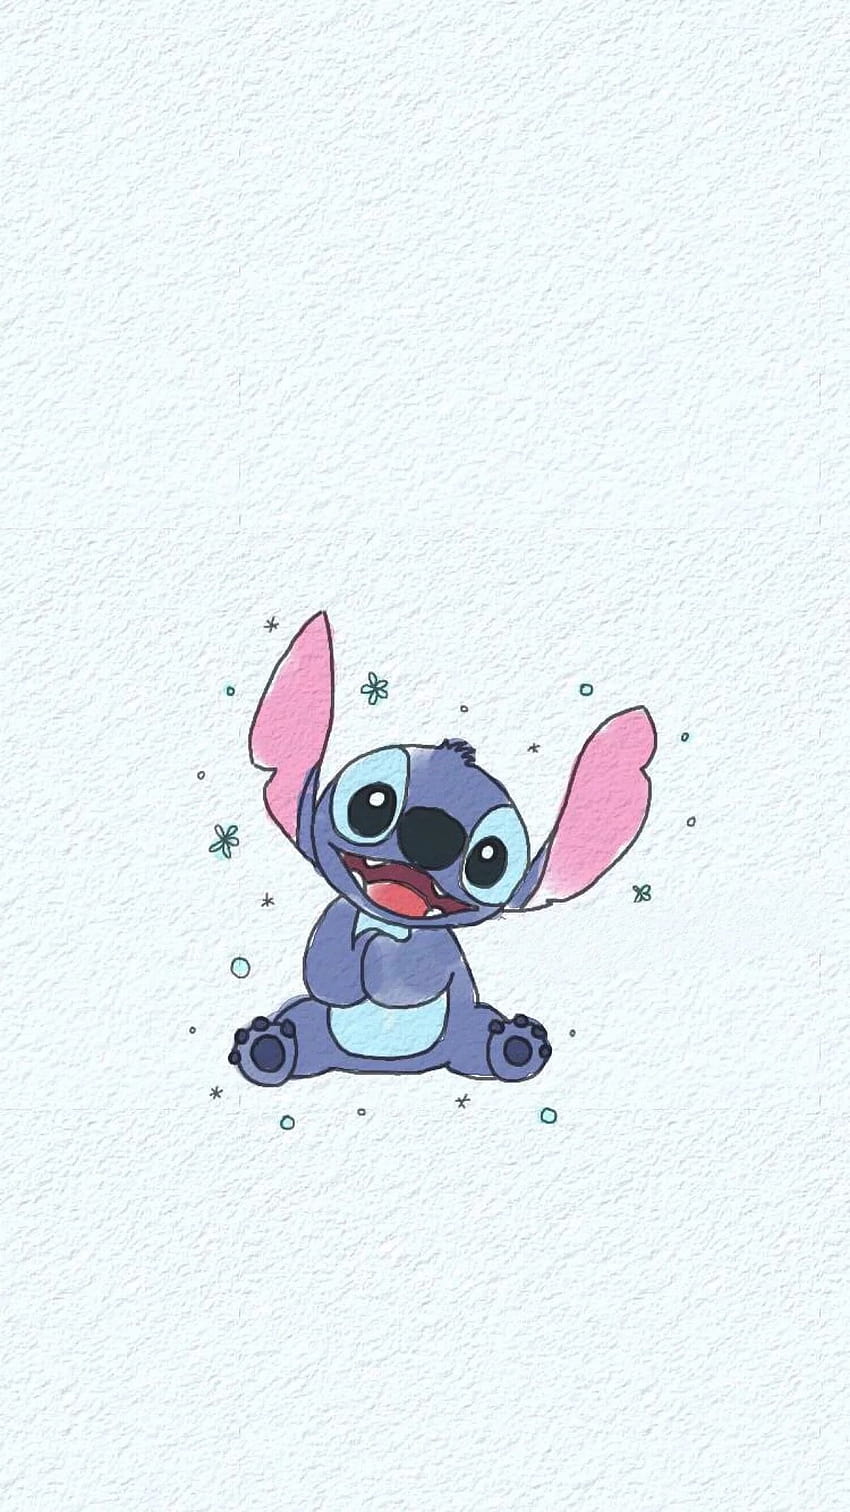 Stitch wallpaper phone, drawing of stitch from lilo and stitch, white background - Bestie